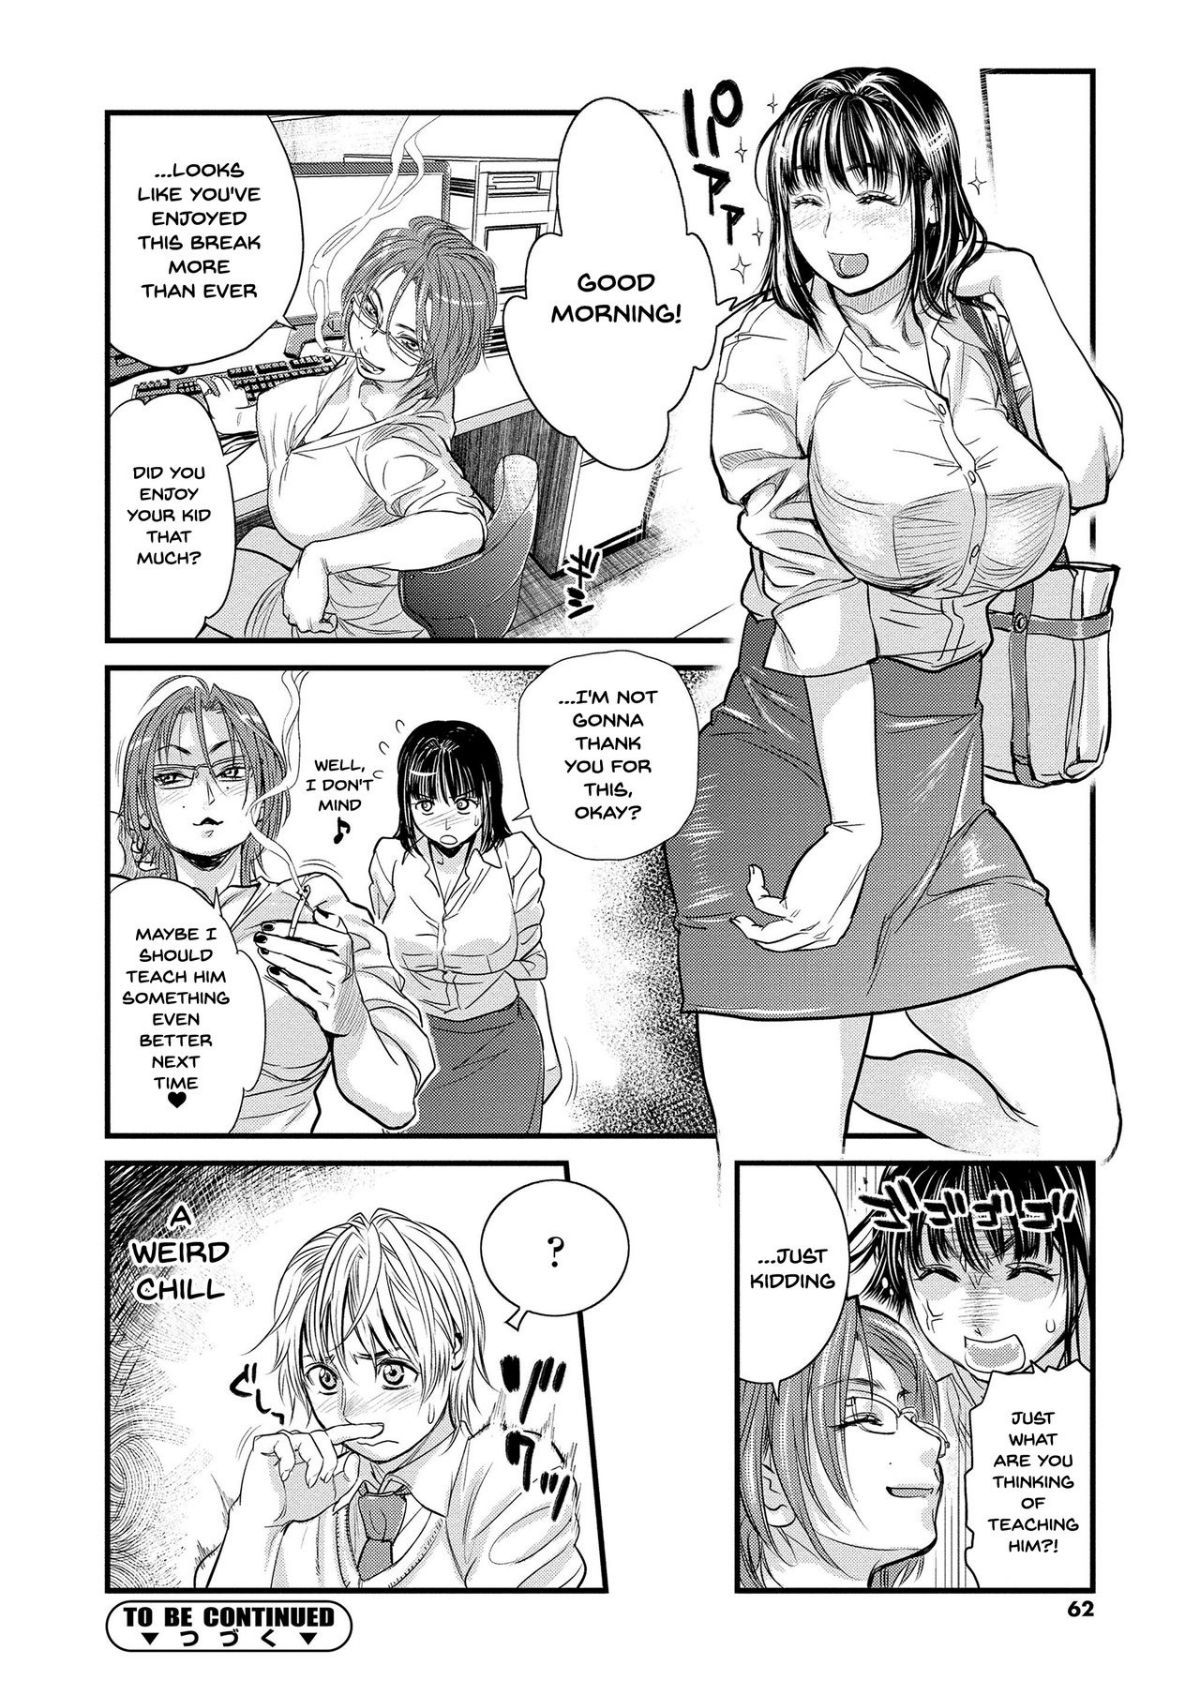 Together With My Older Cousin part 3 Hentai english 19